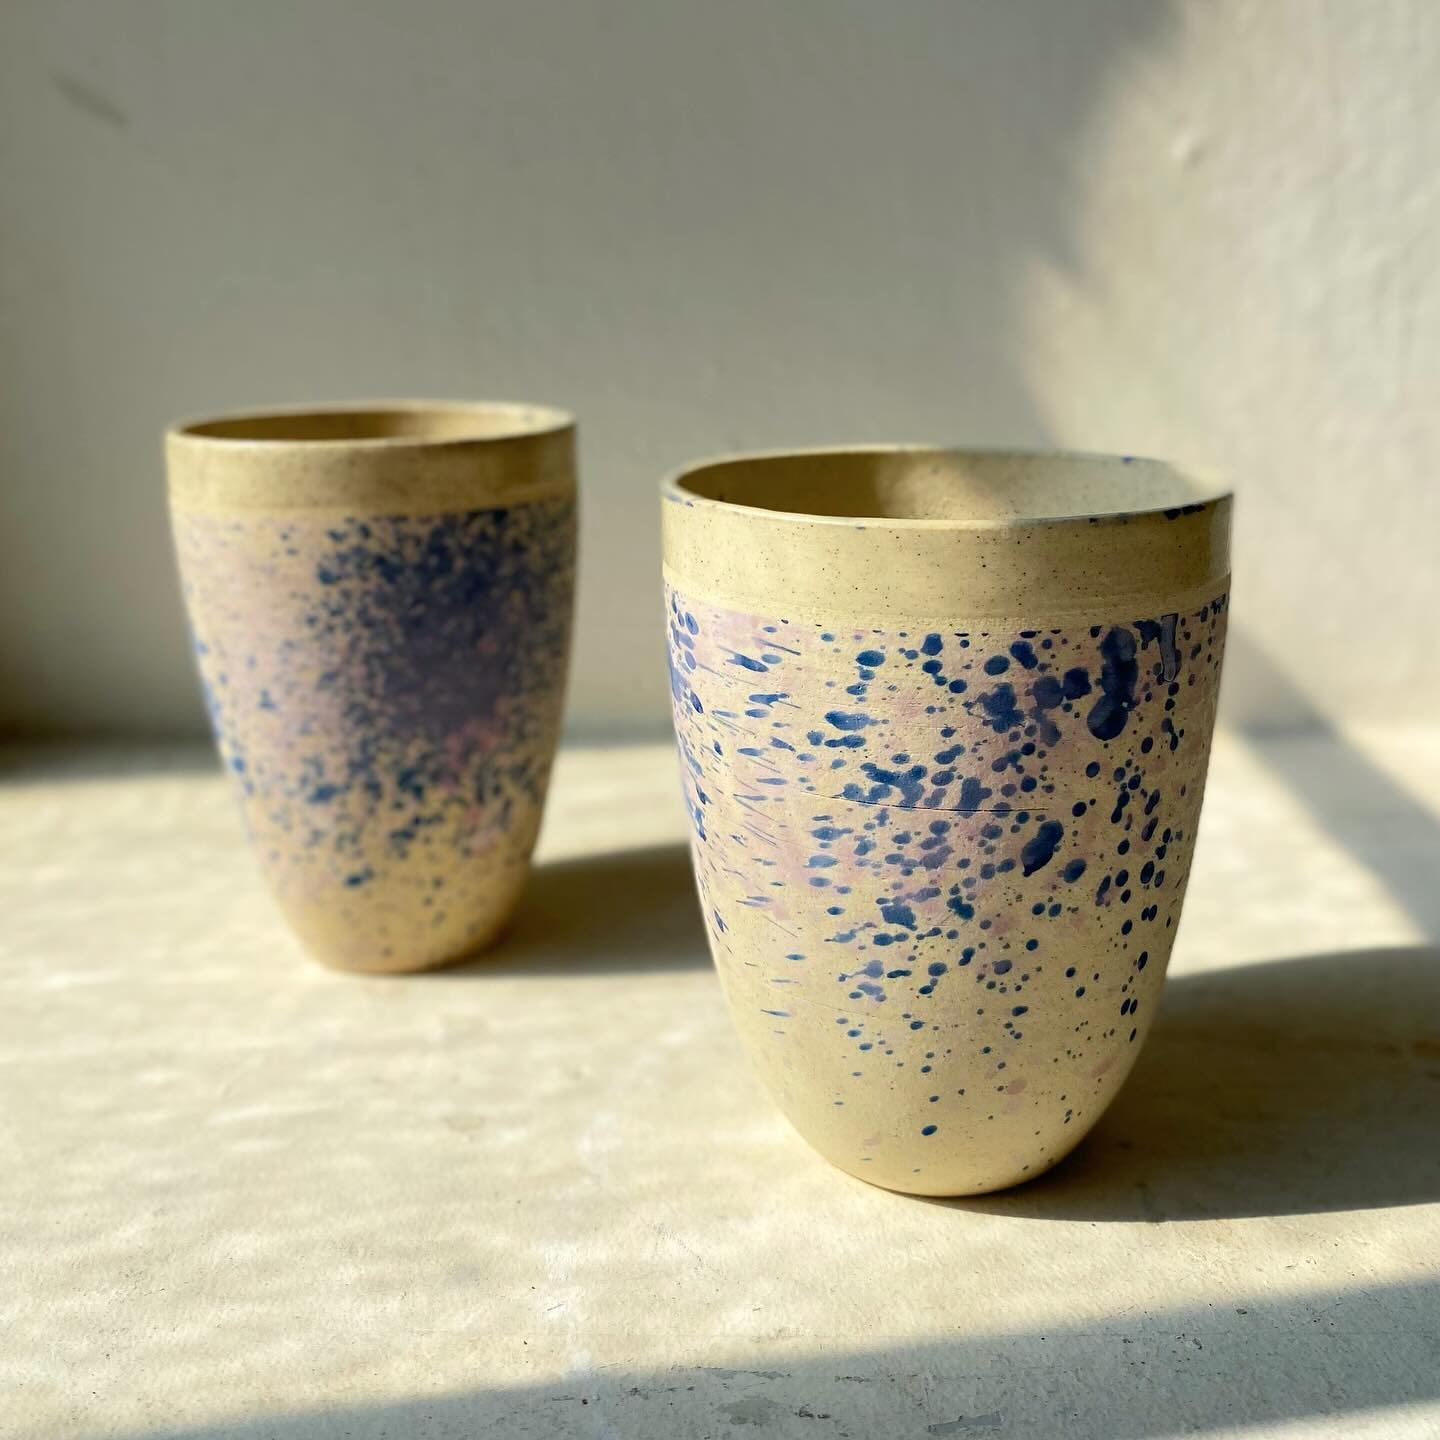 Yesterday, I delivered these cups to the @australiandesigncentre for their upcoming Morning Tea to celebrate ADC&rsquo;s 60th year. 

Taking place on Thursday 23 May, 10am-12pm
a ticket includes one handmade cup by a local ceramic artist and a catere